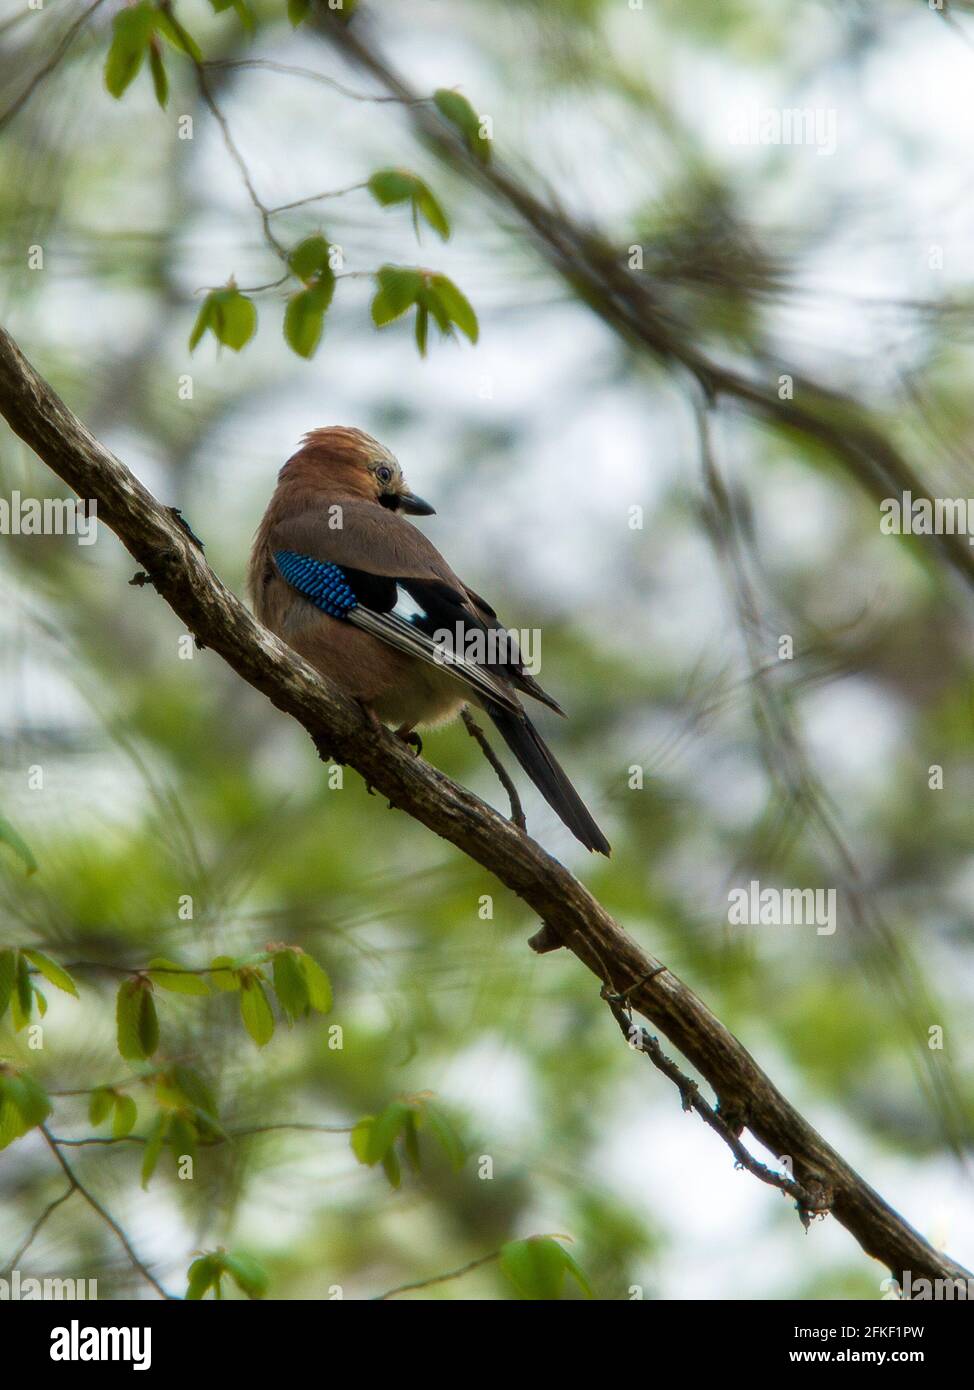 Jay on a branch in spring Stock Photo